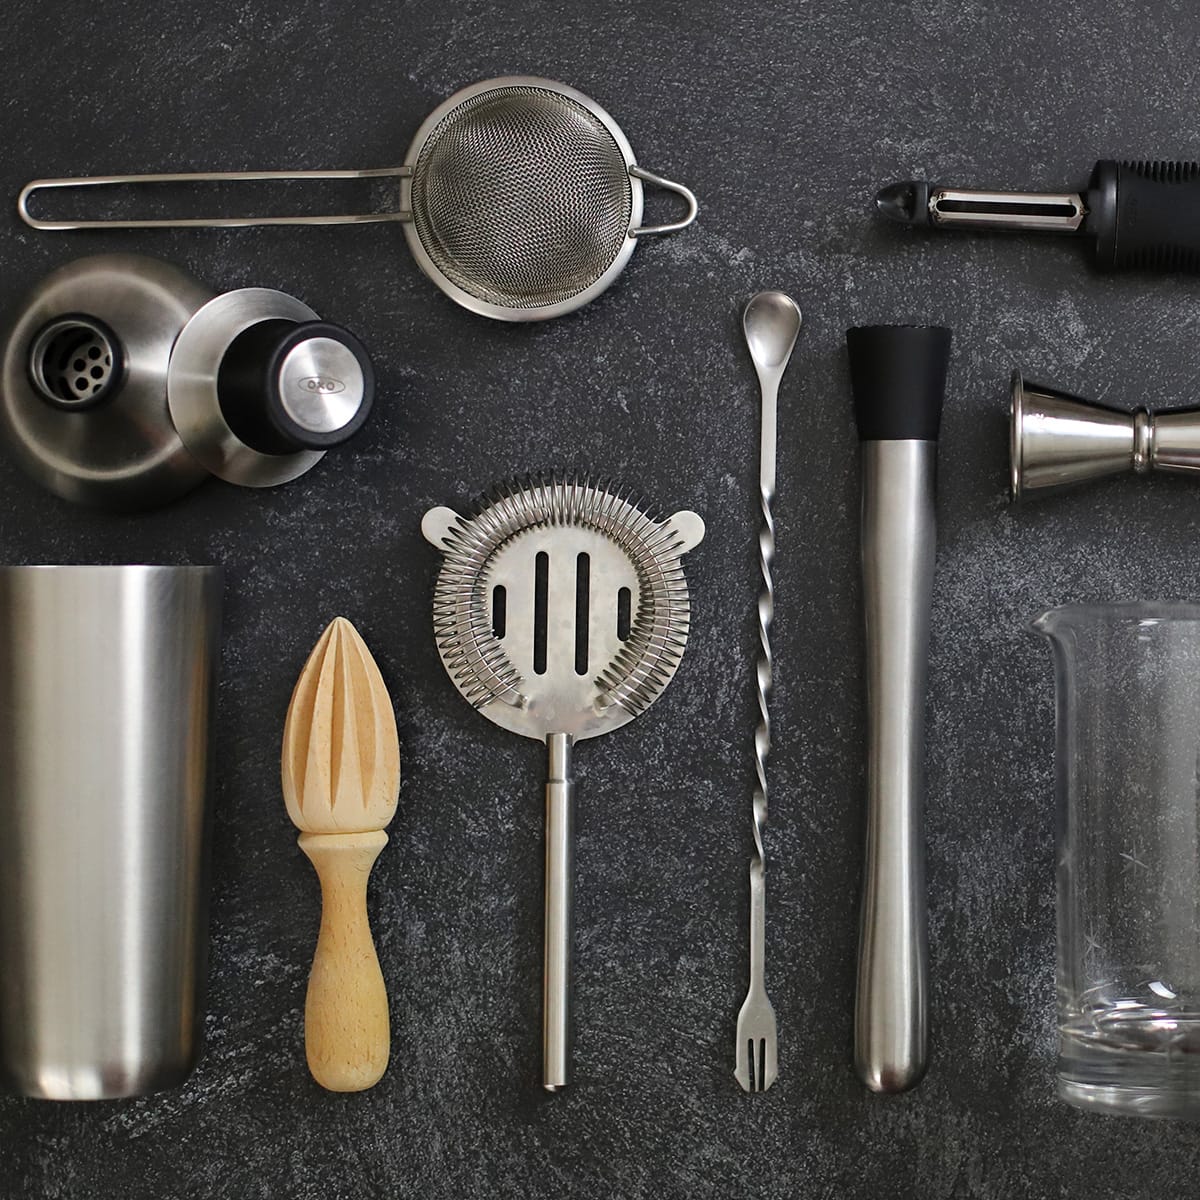 A selection of bar tools recommended for home bartenders.